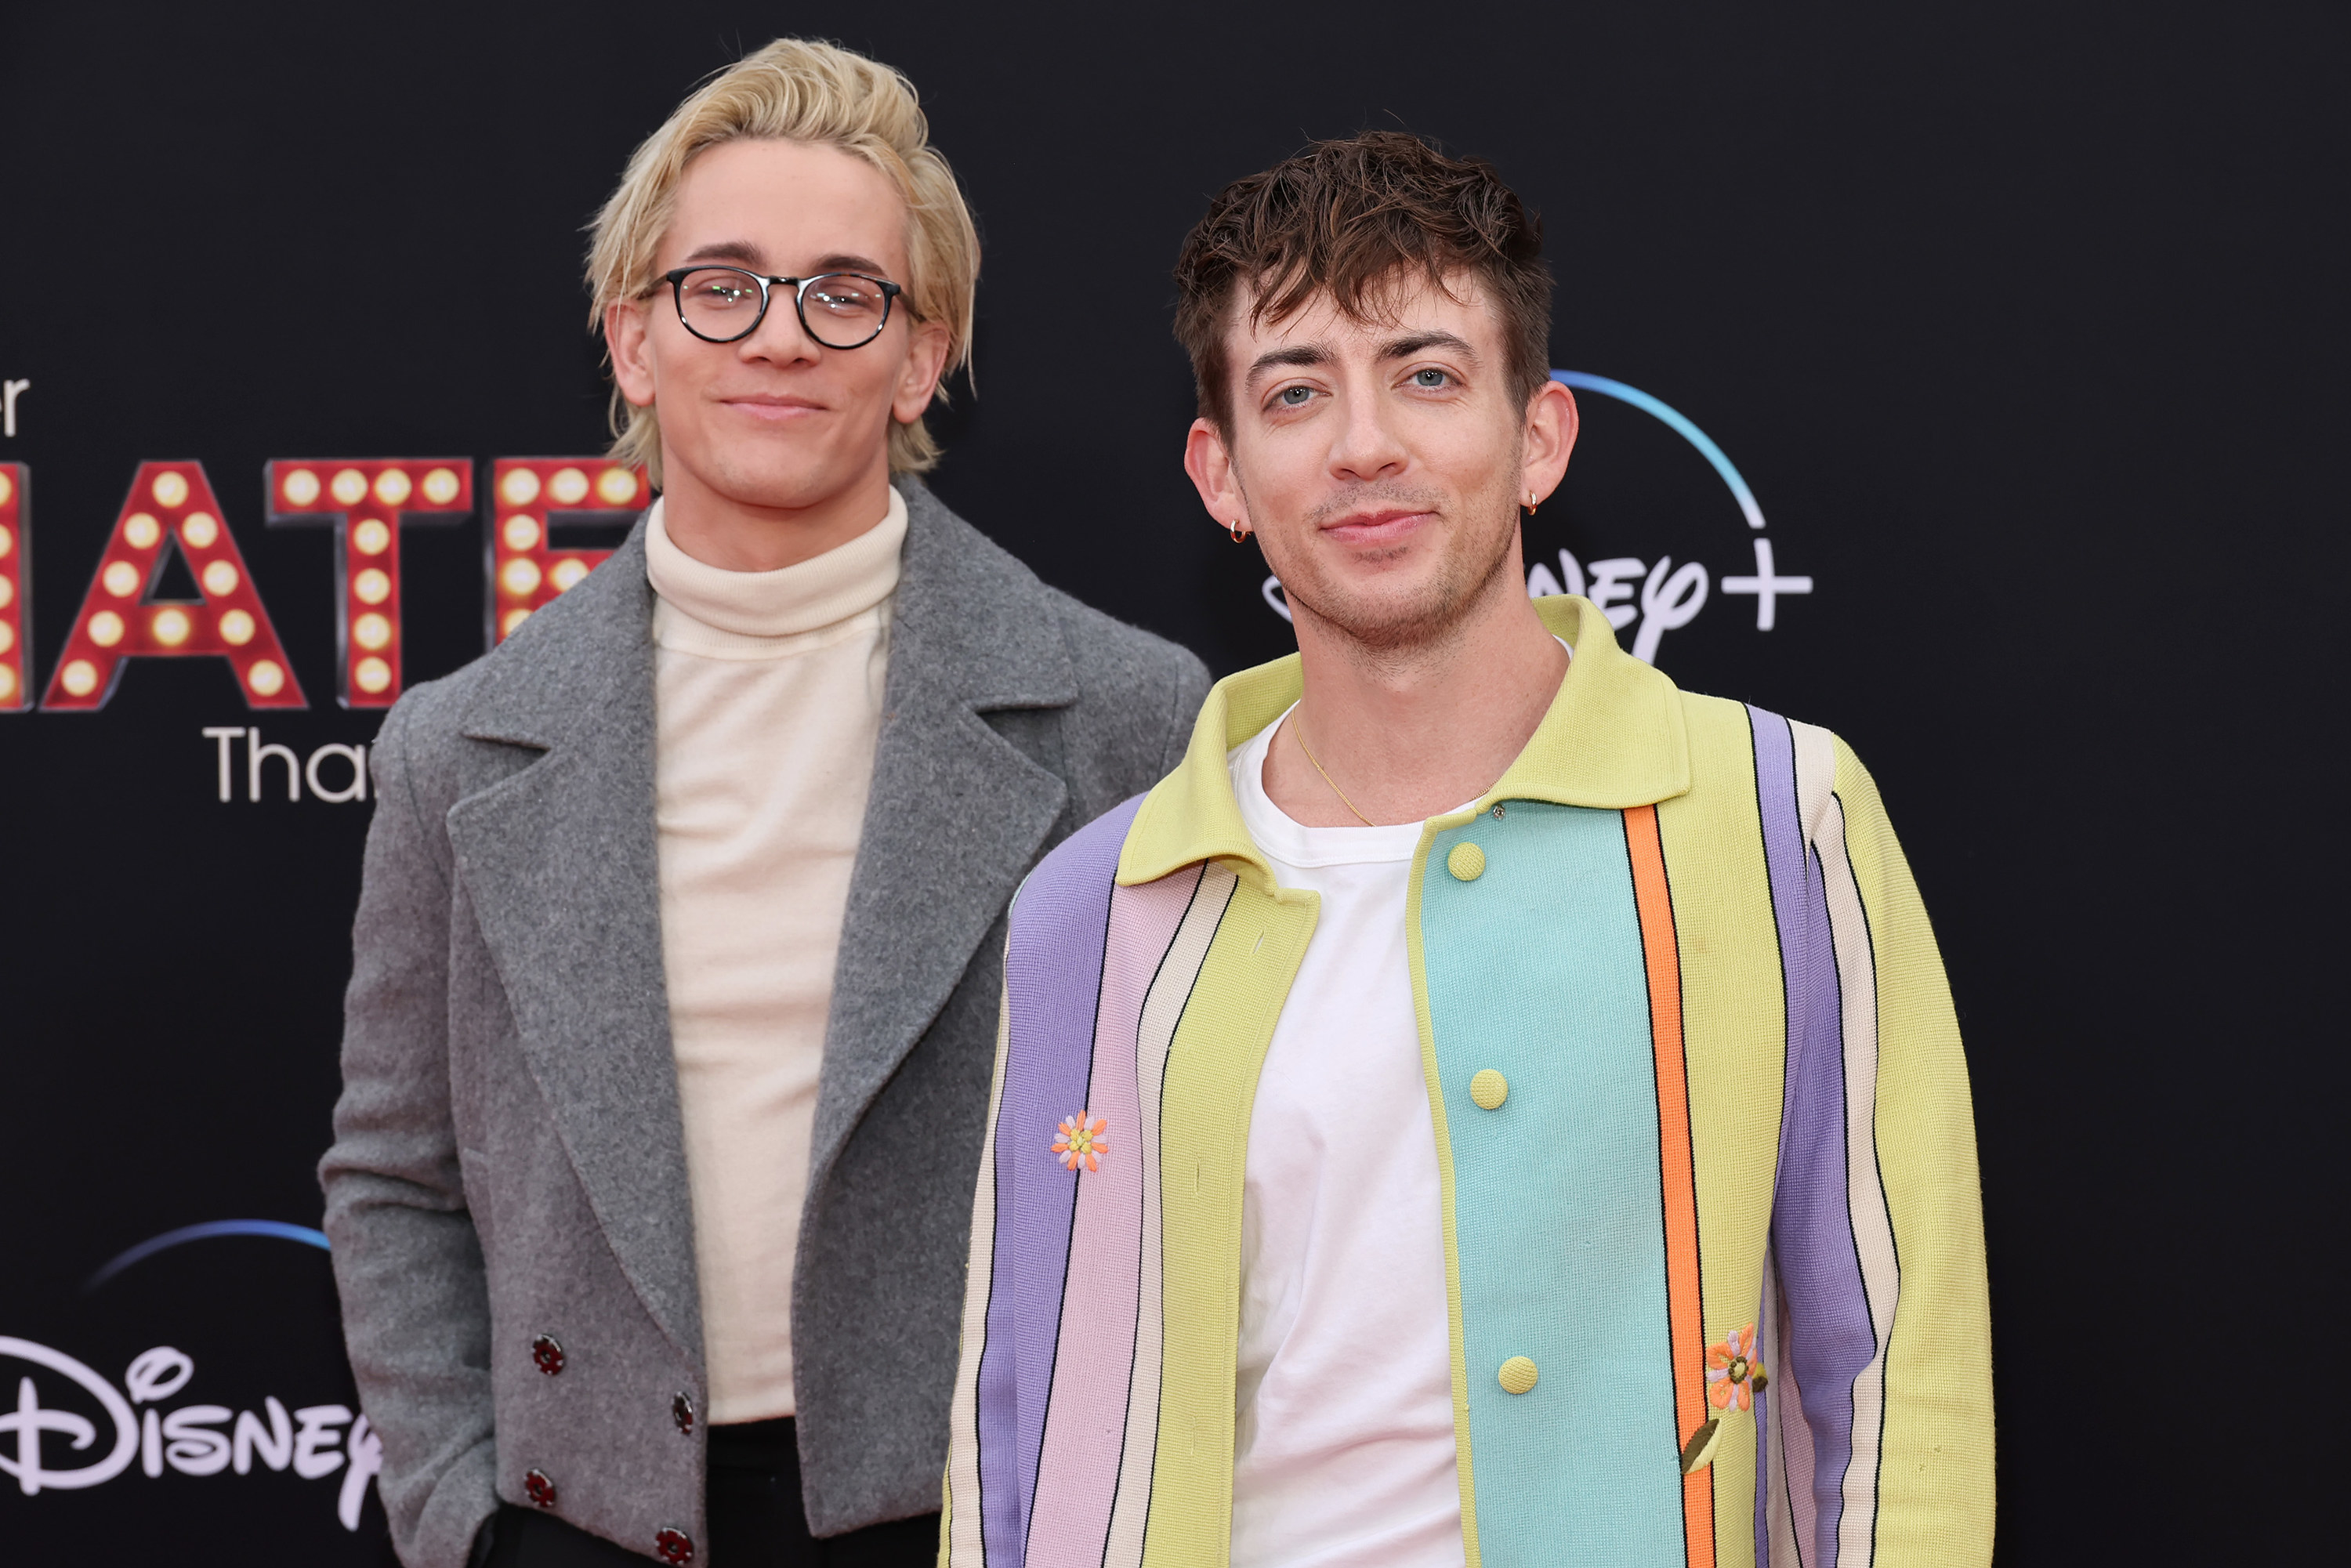 Austin McKenzie and Kevin McHale at an event